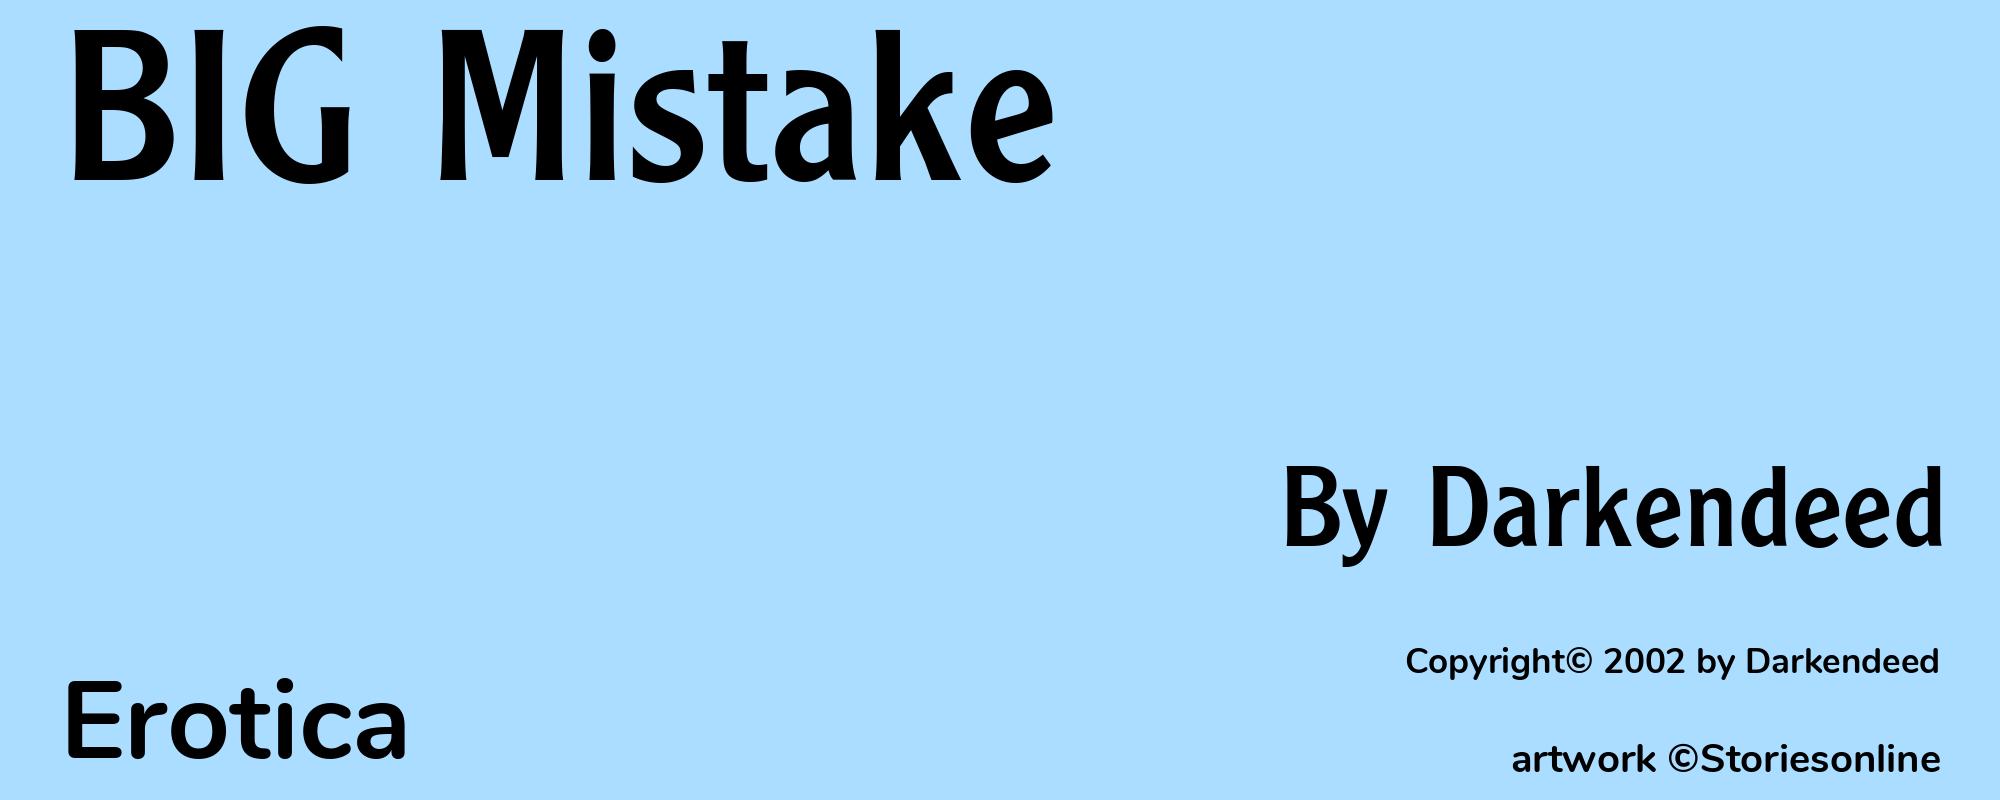 BIG Mistake - Cover